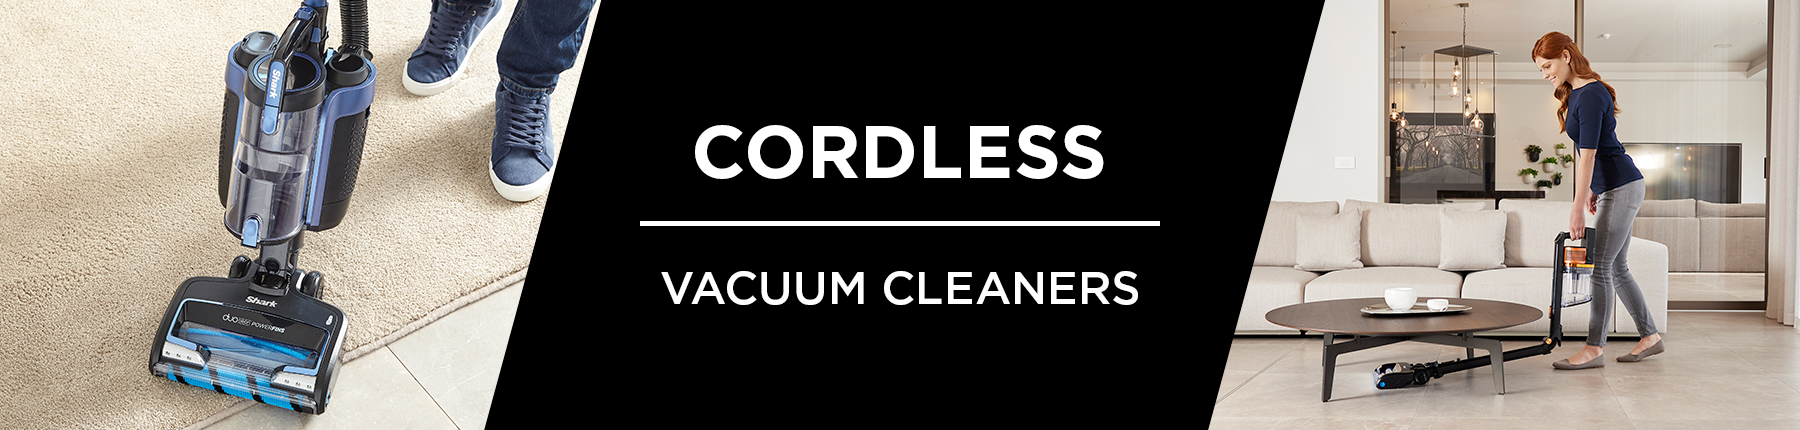 Banner Cordless Vacuum Cleaners